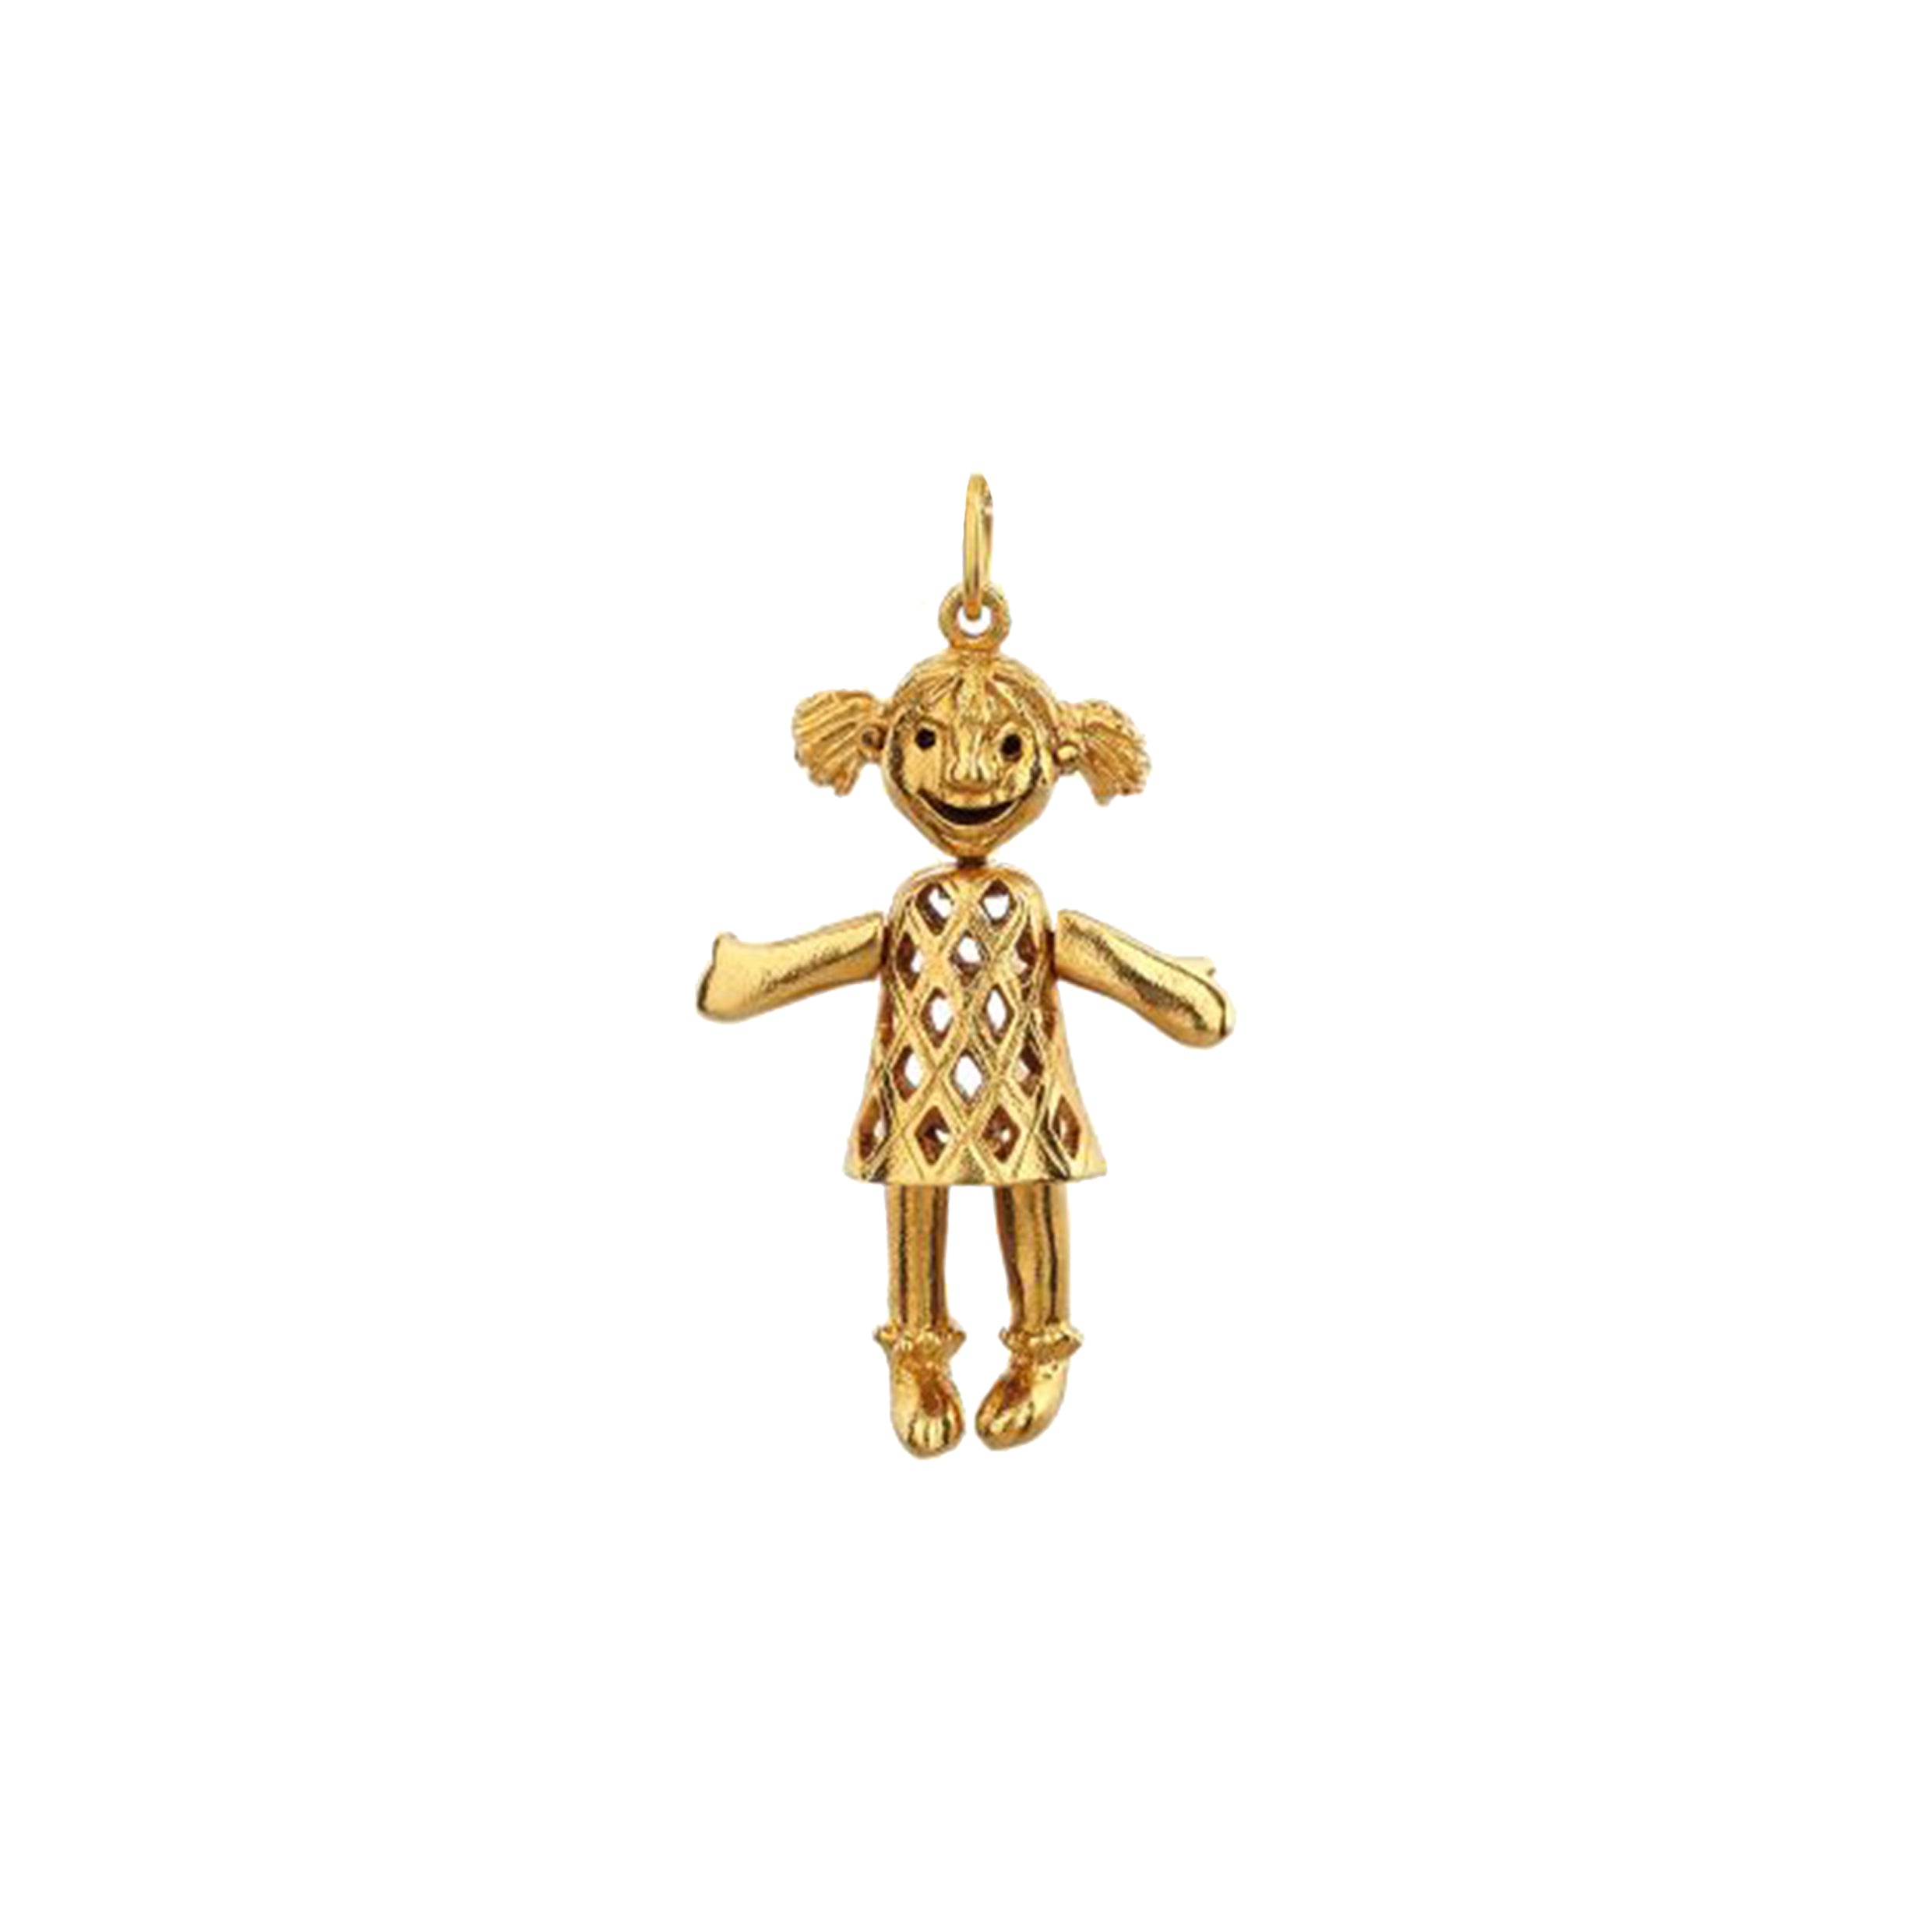 Articulated Doll Charm - Mirabelle Jewellery